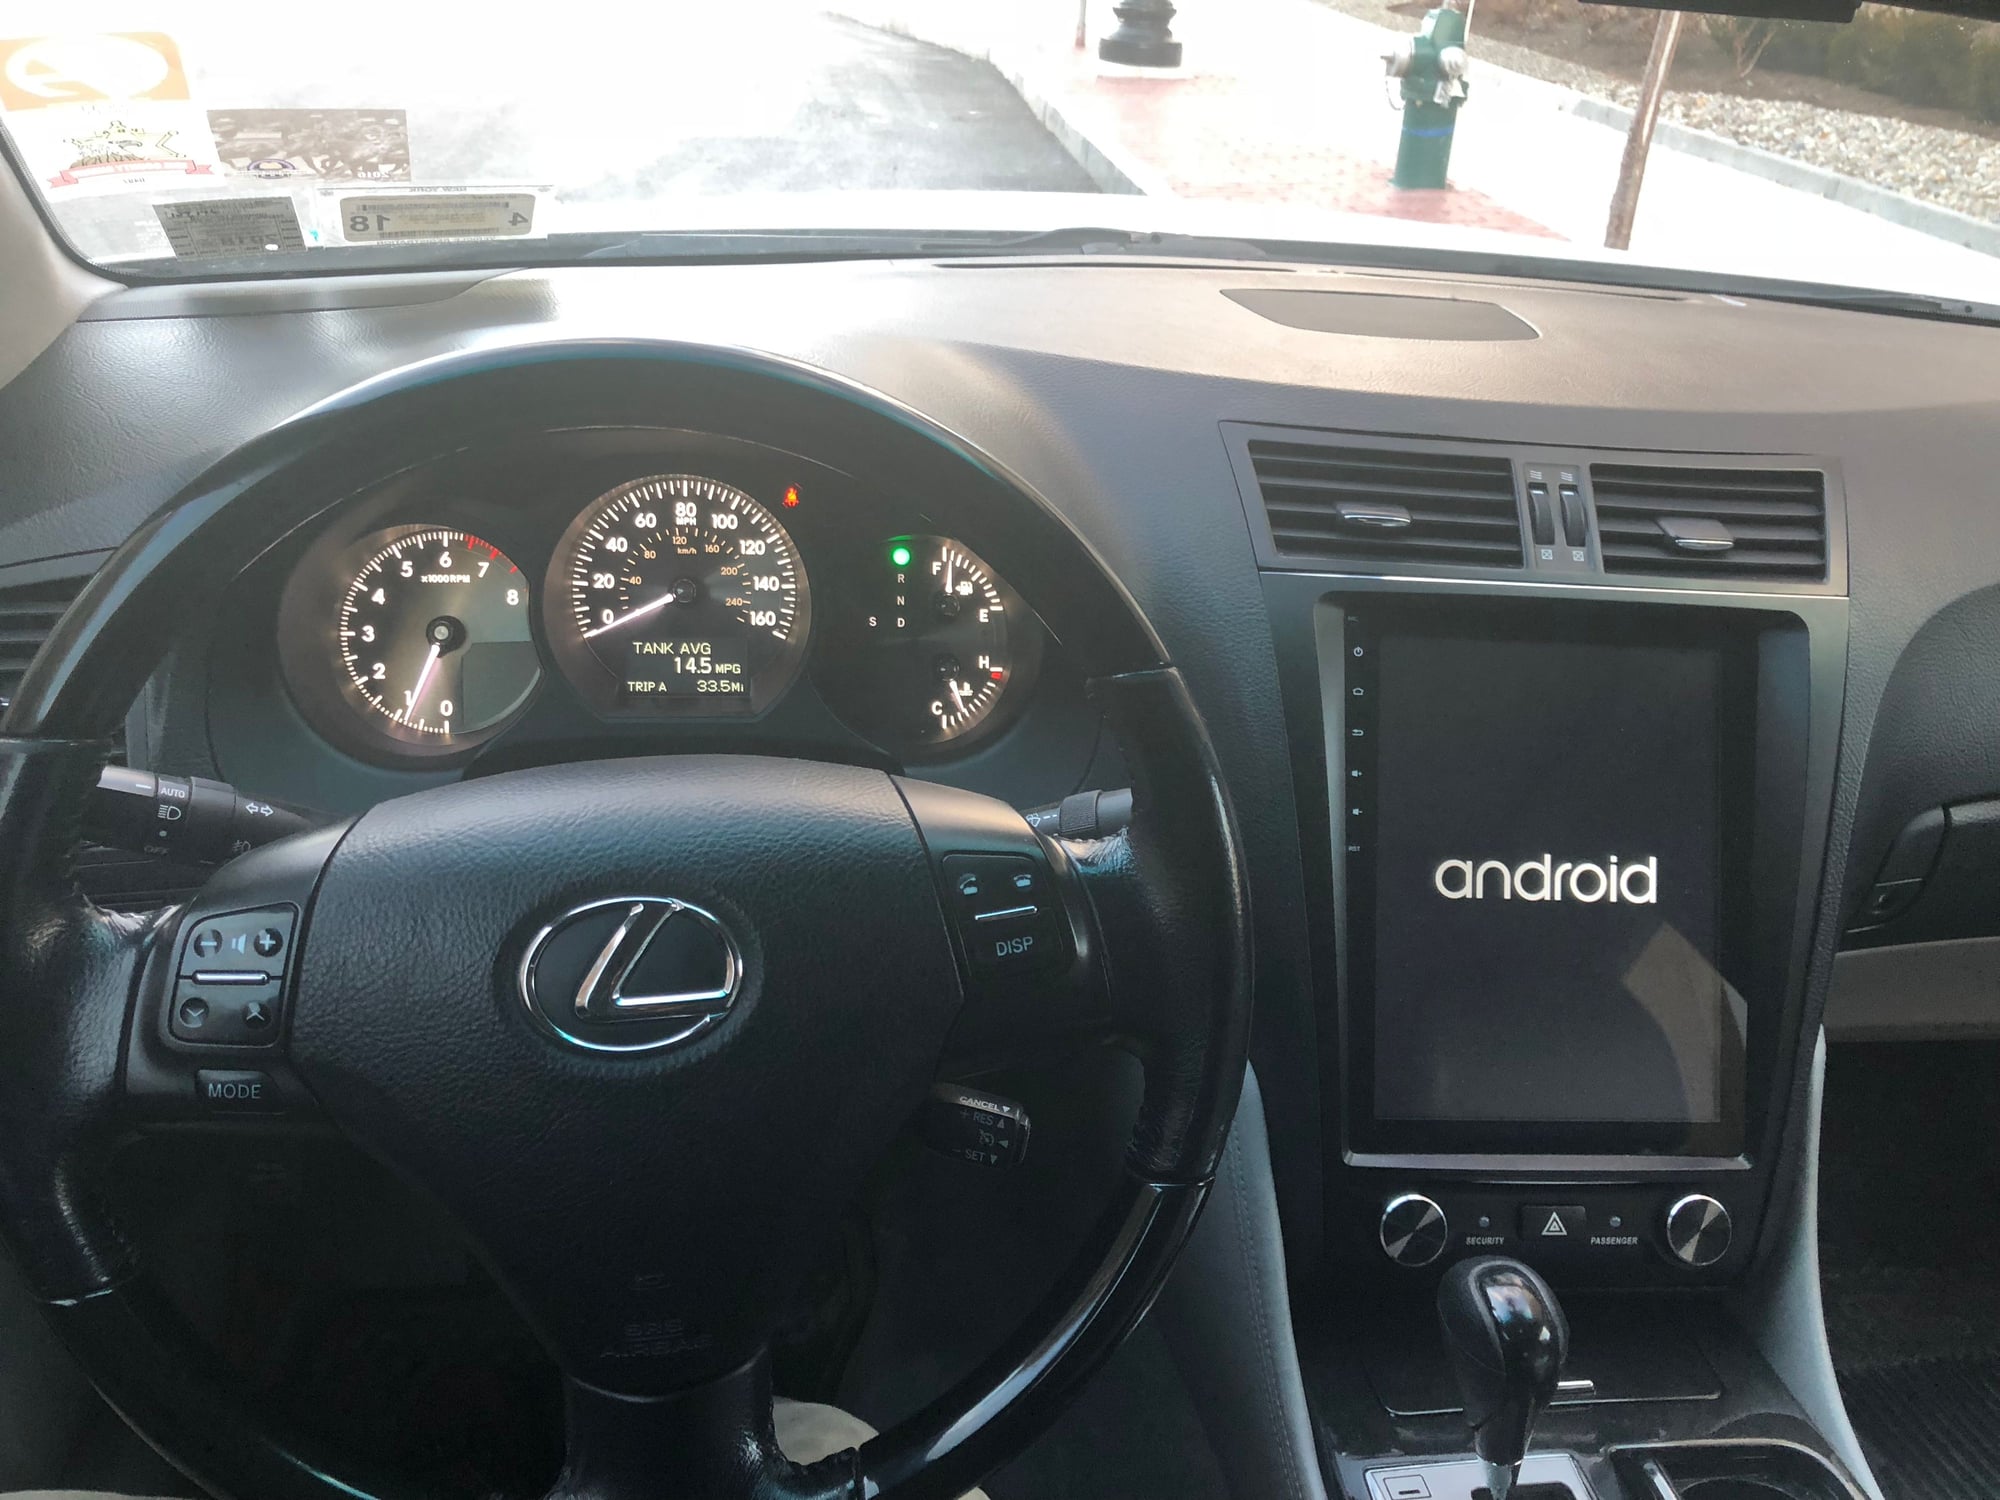 Audio Video/Electronics - 3rd Gen GS Tesla Style Headunit. - Used - 2006 to 2011 Lexus GS350 - Albany, NY 12208, United States